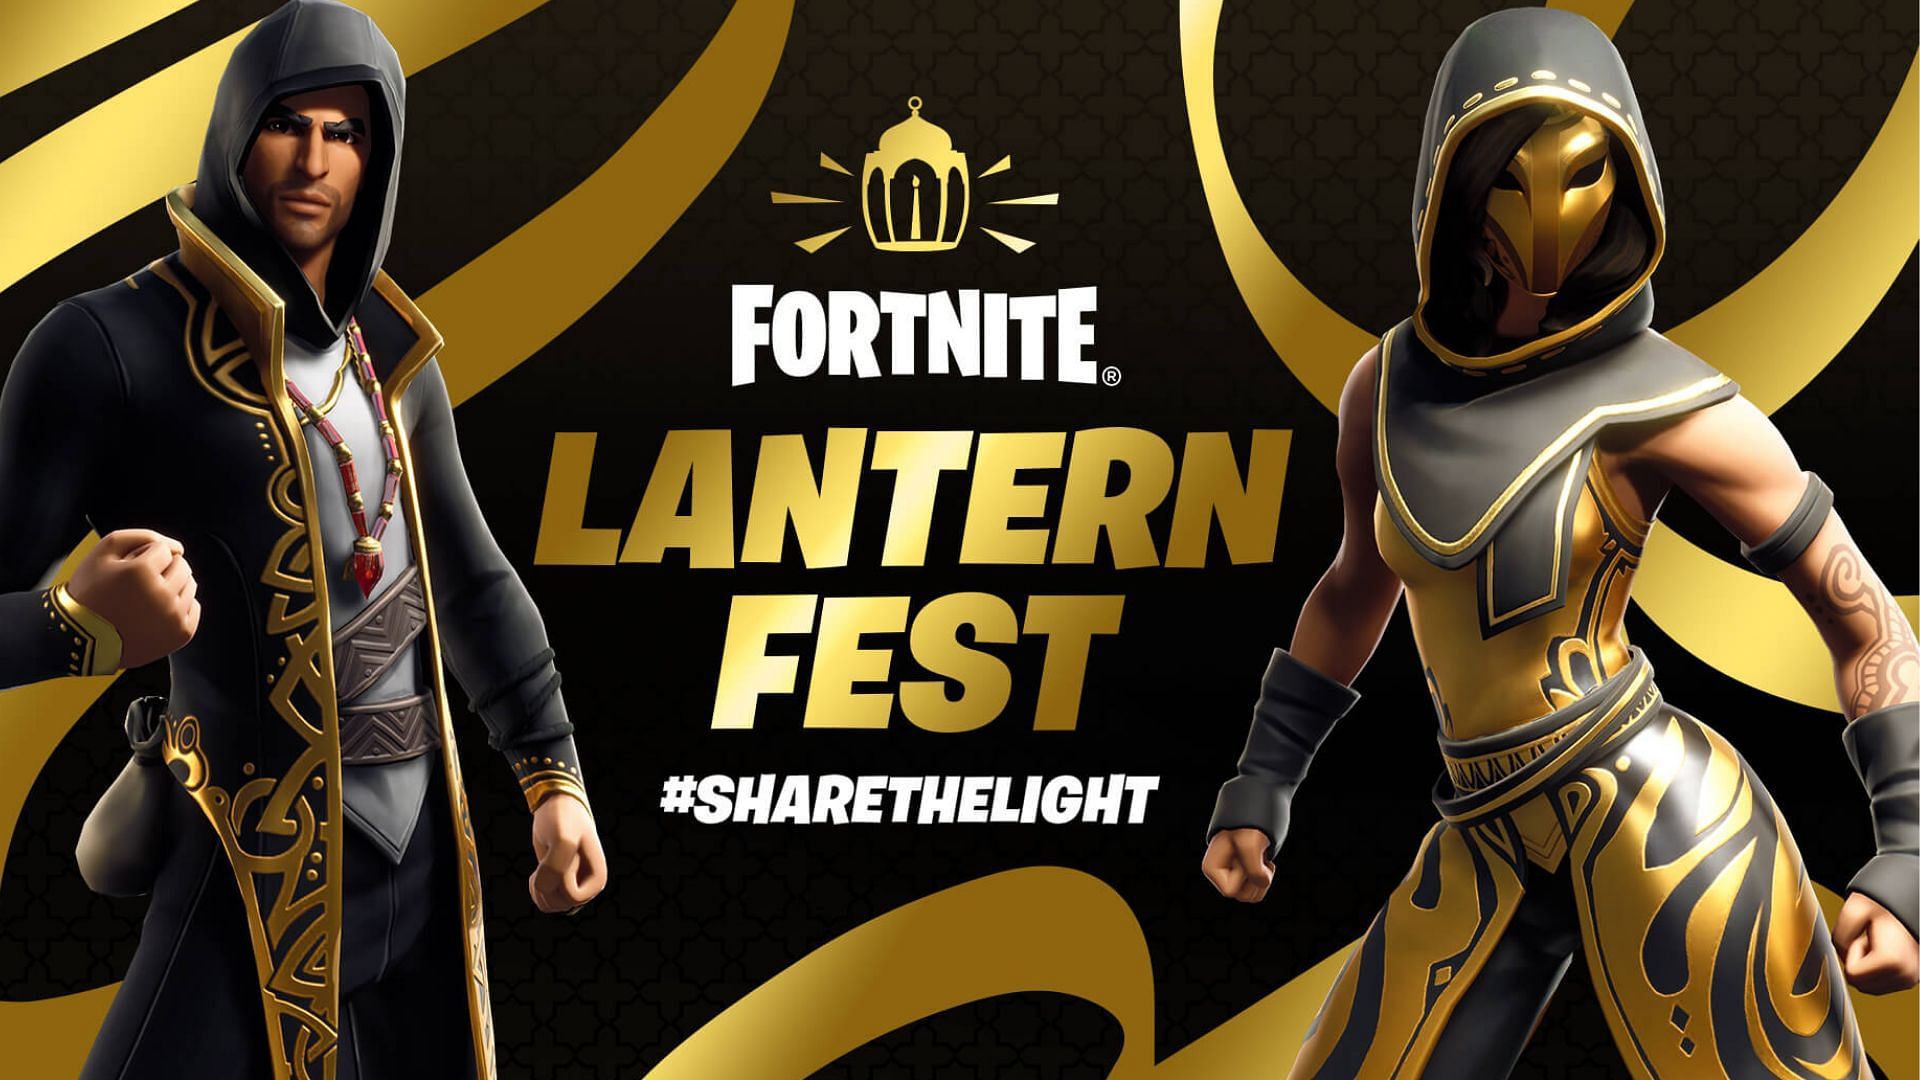 Epic Games has announced that Fortnite is celebrating Lantern fest 2022, and players can win rewards by participating in the challenges in-game (Image via Epic Games)